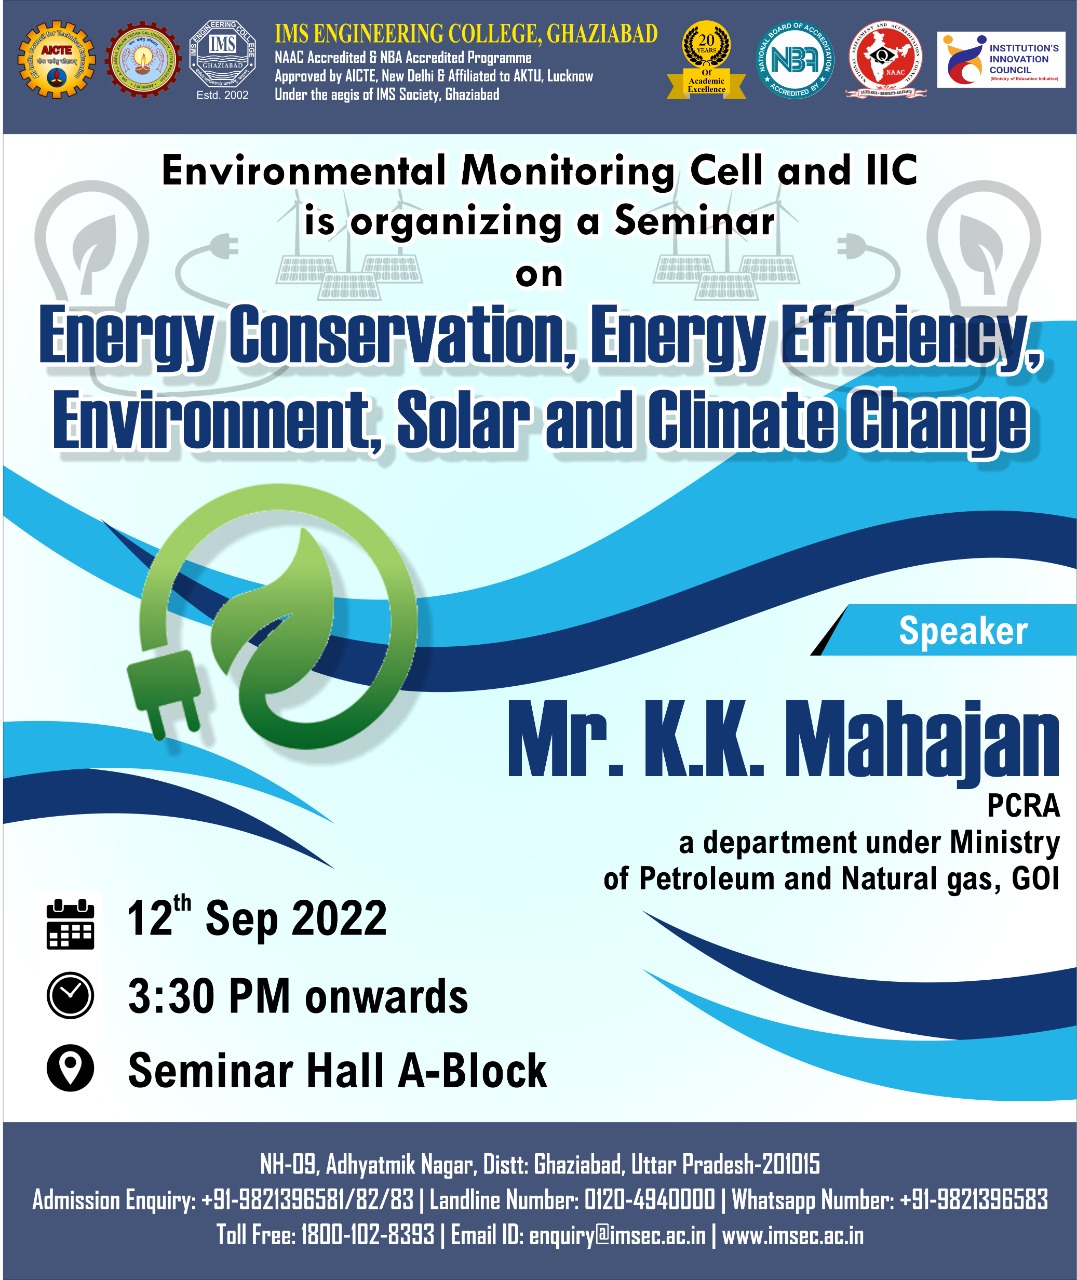 Energy Conservation, Energy Efficiency, Environment, Solar and Climate Change